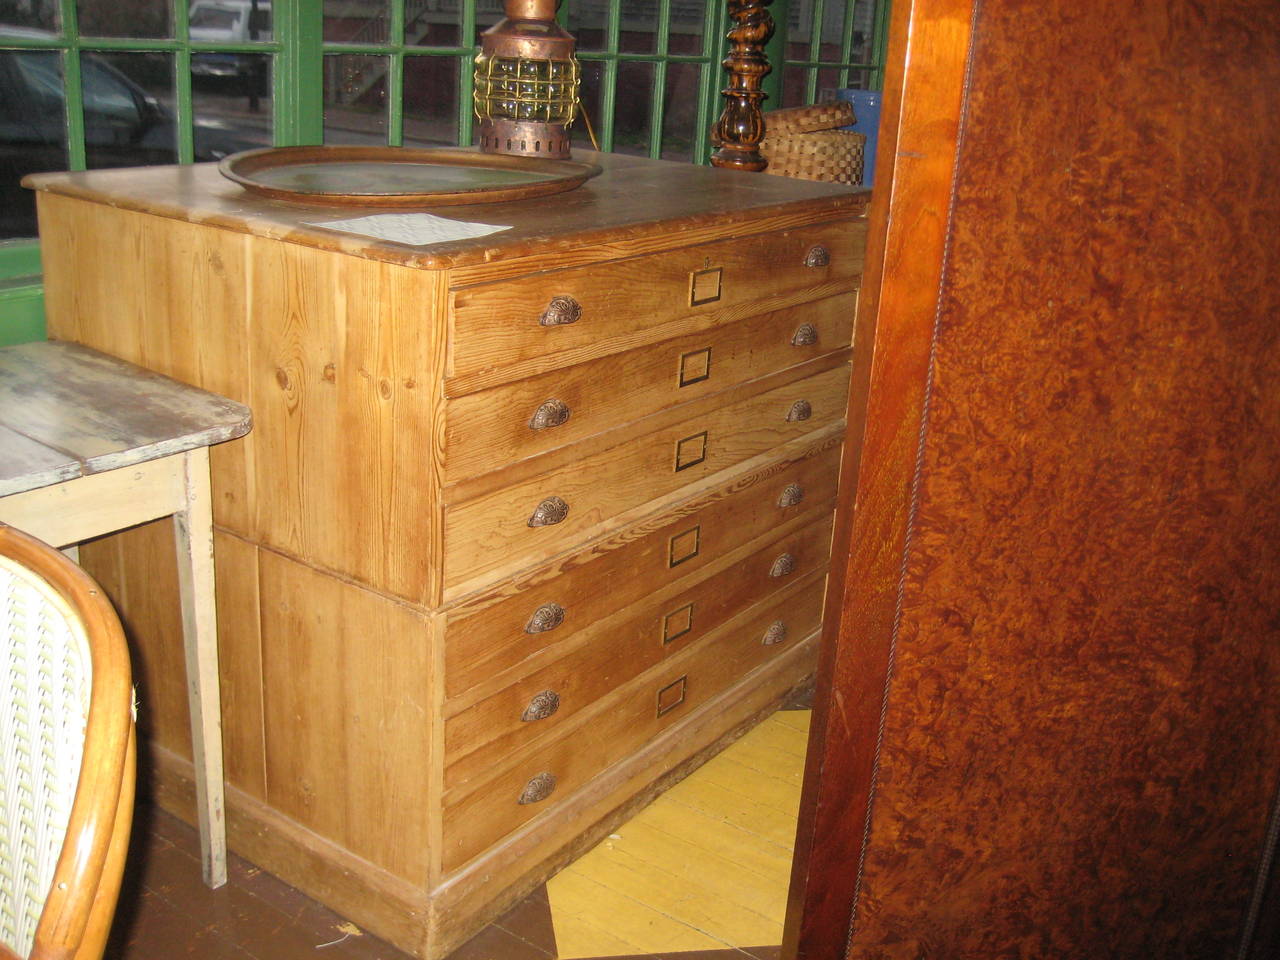 architect drawers for sale